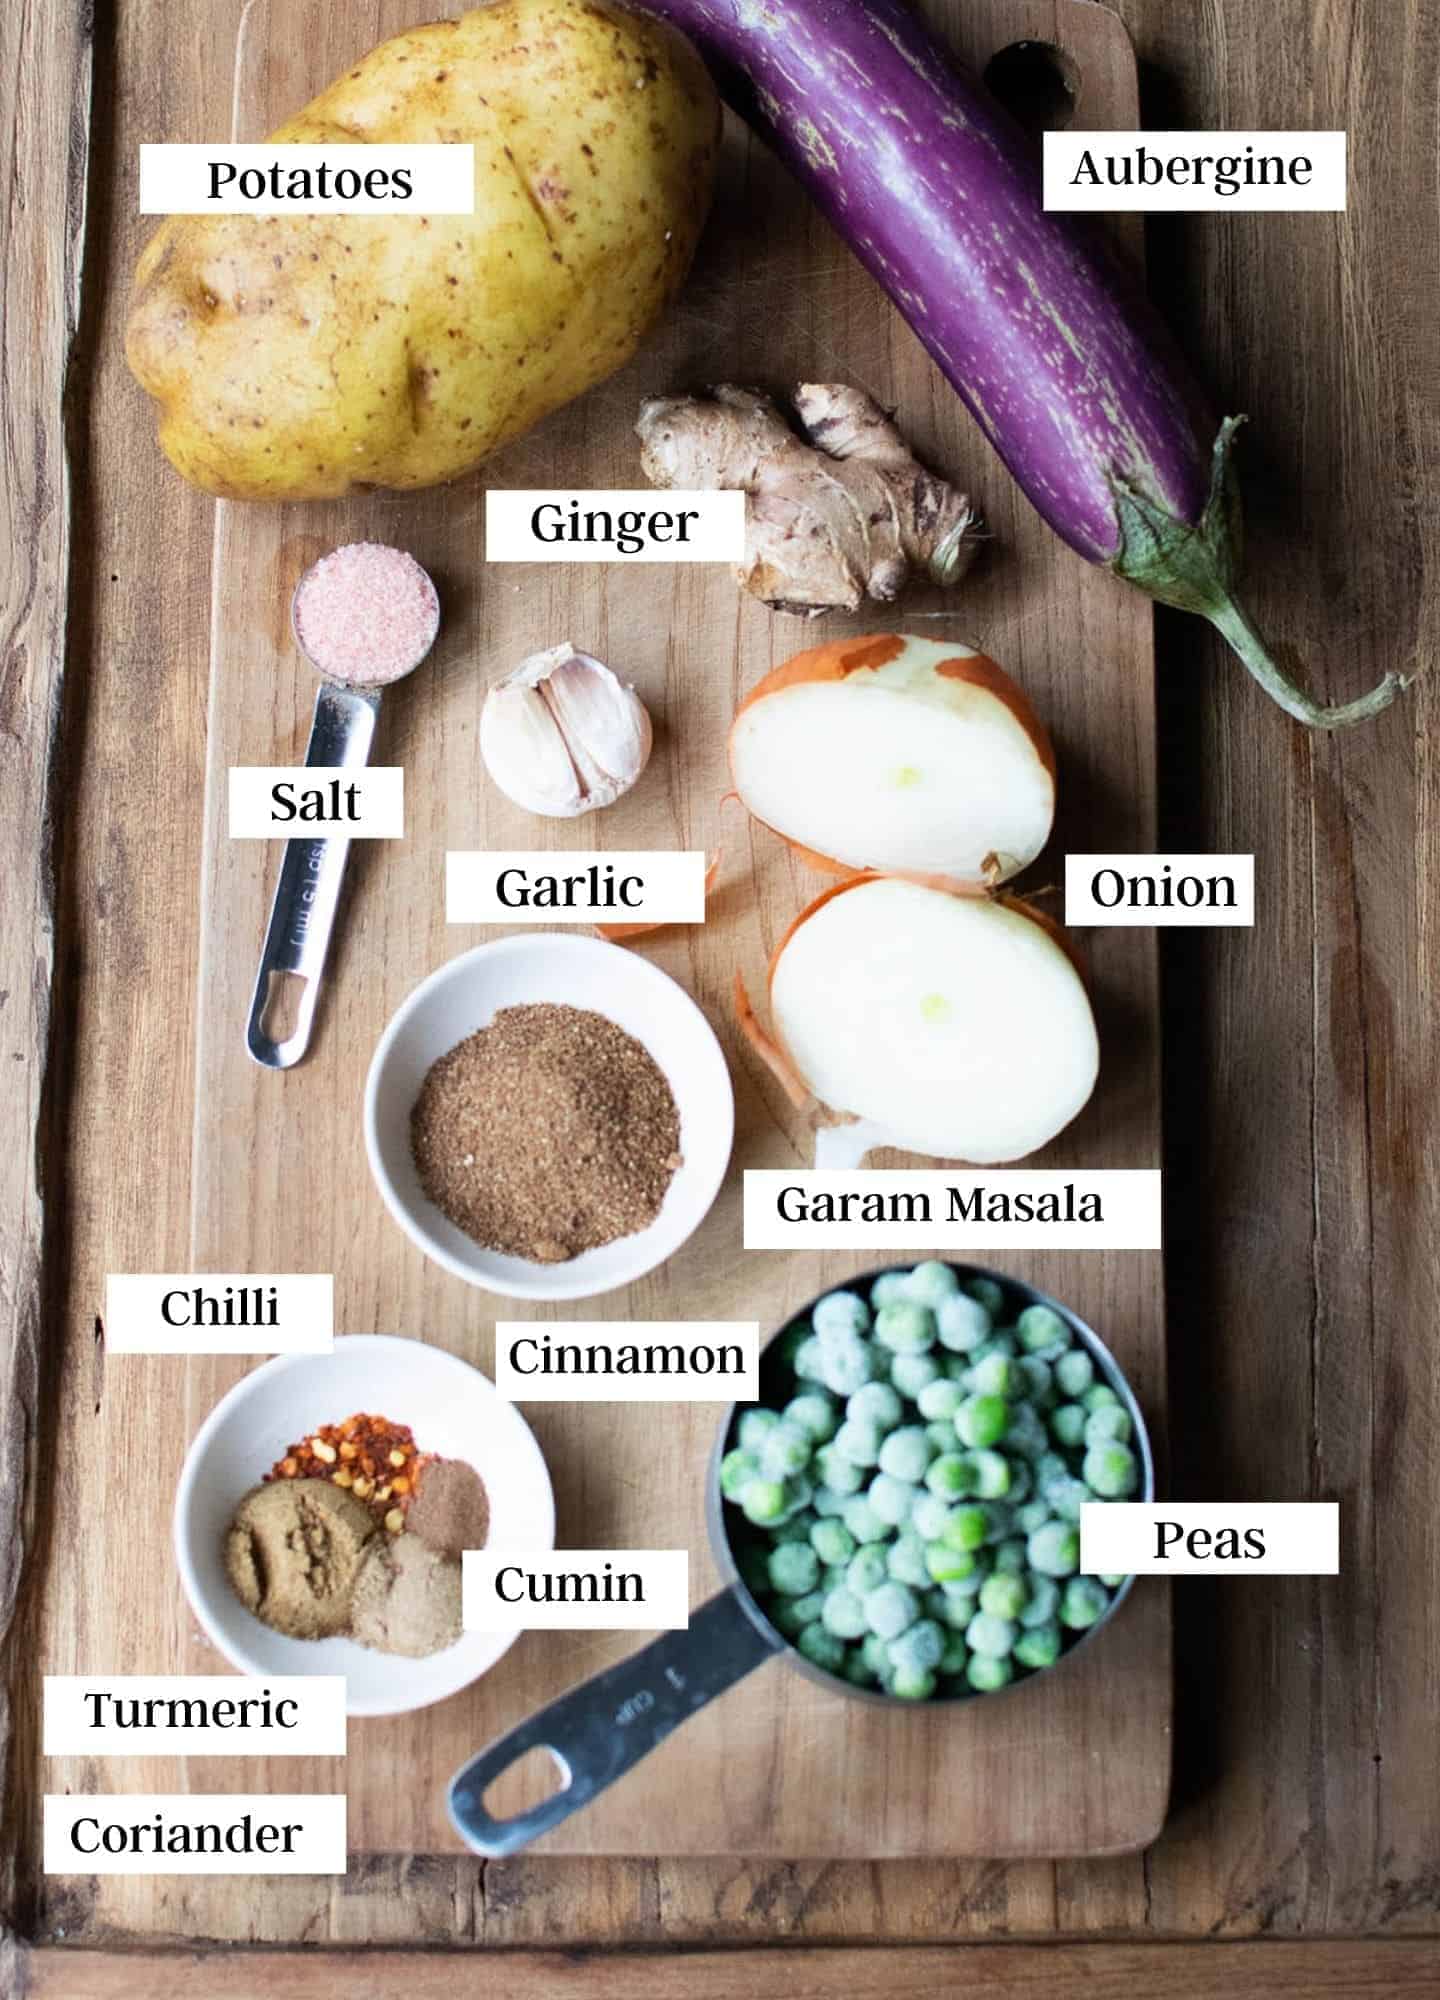 Top down view of ingredients laid out on top of a chopping board. Showing aubergine, potato, peas, onion, garlic, ginger and powdered spices and salt